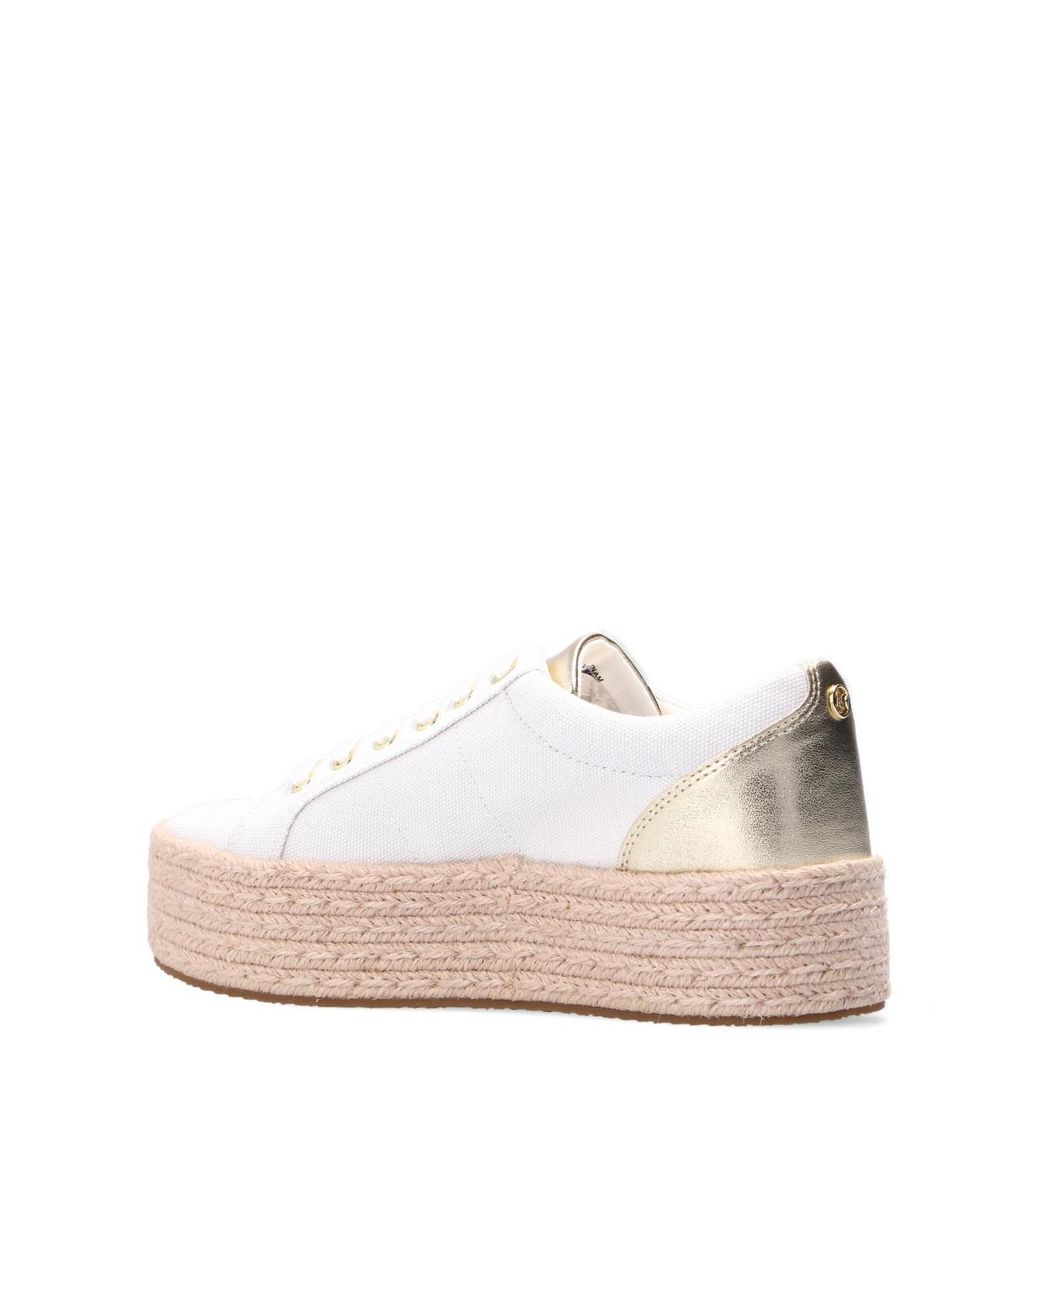 MICHAEL Michael Kors 'libby' Sneakers in White | Lyst